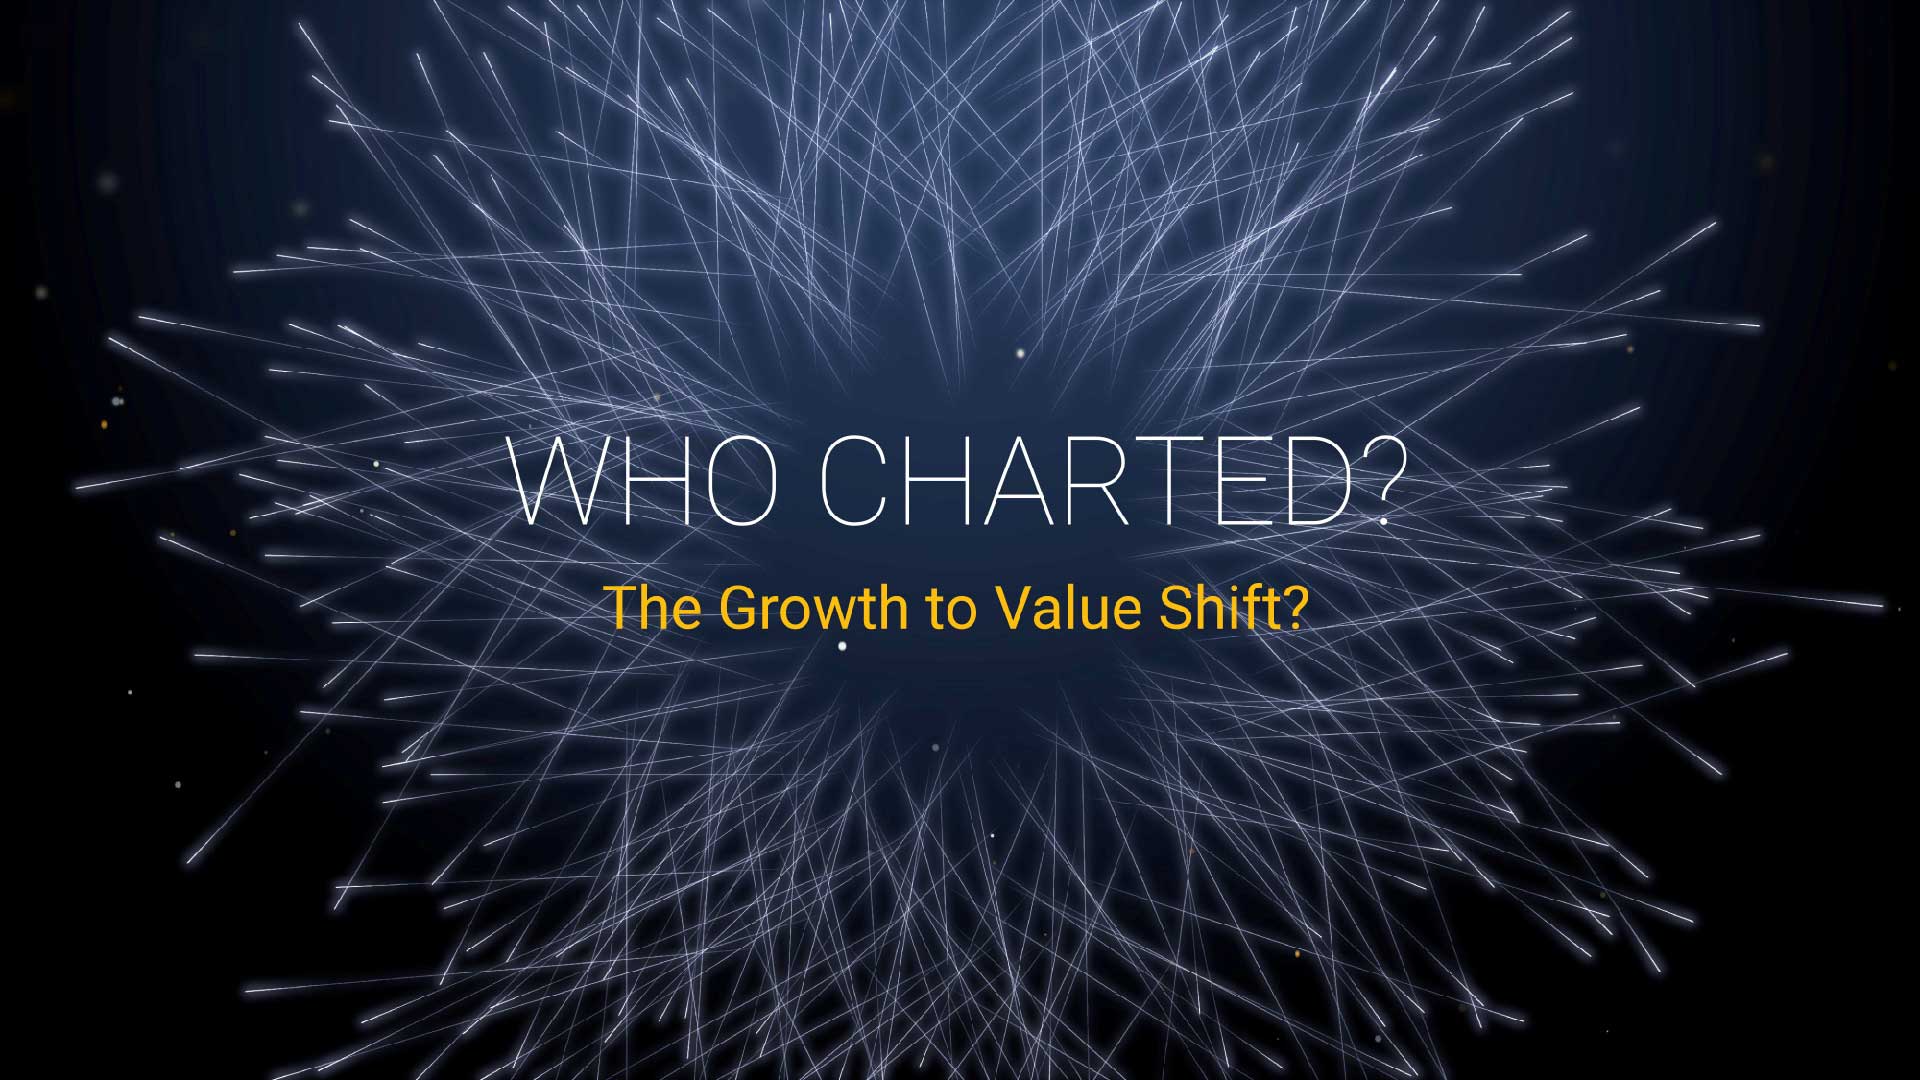 Who Charted? (E17) The Growth to Value Shift?